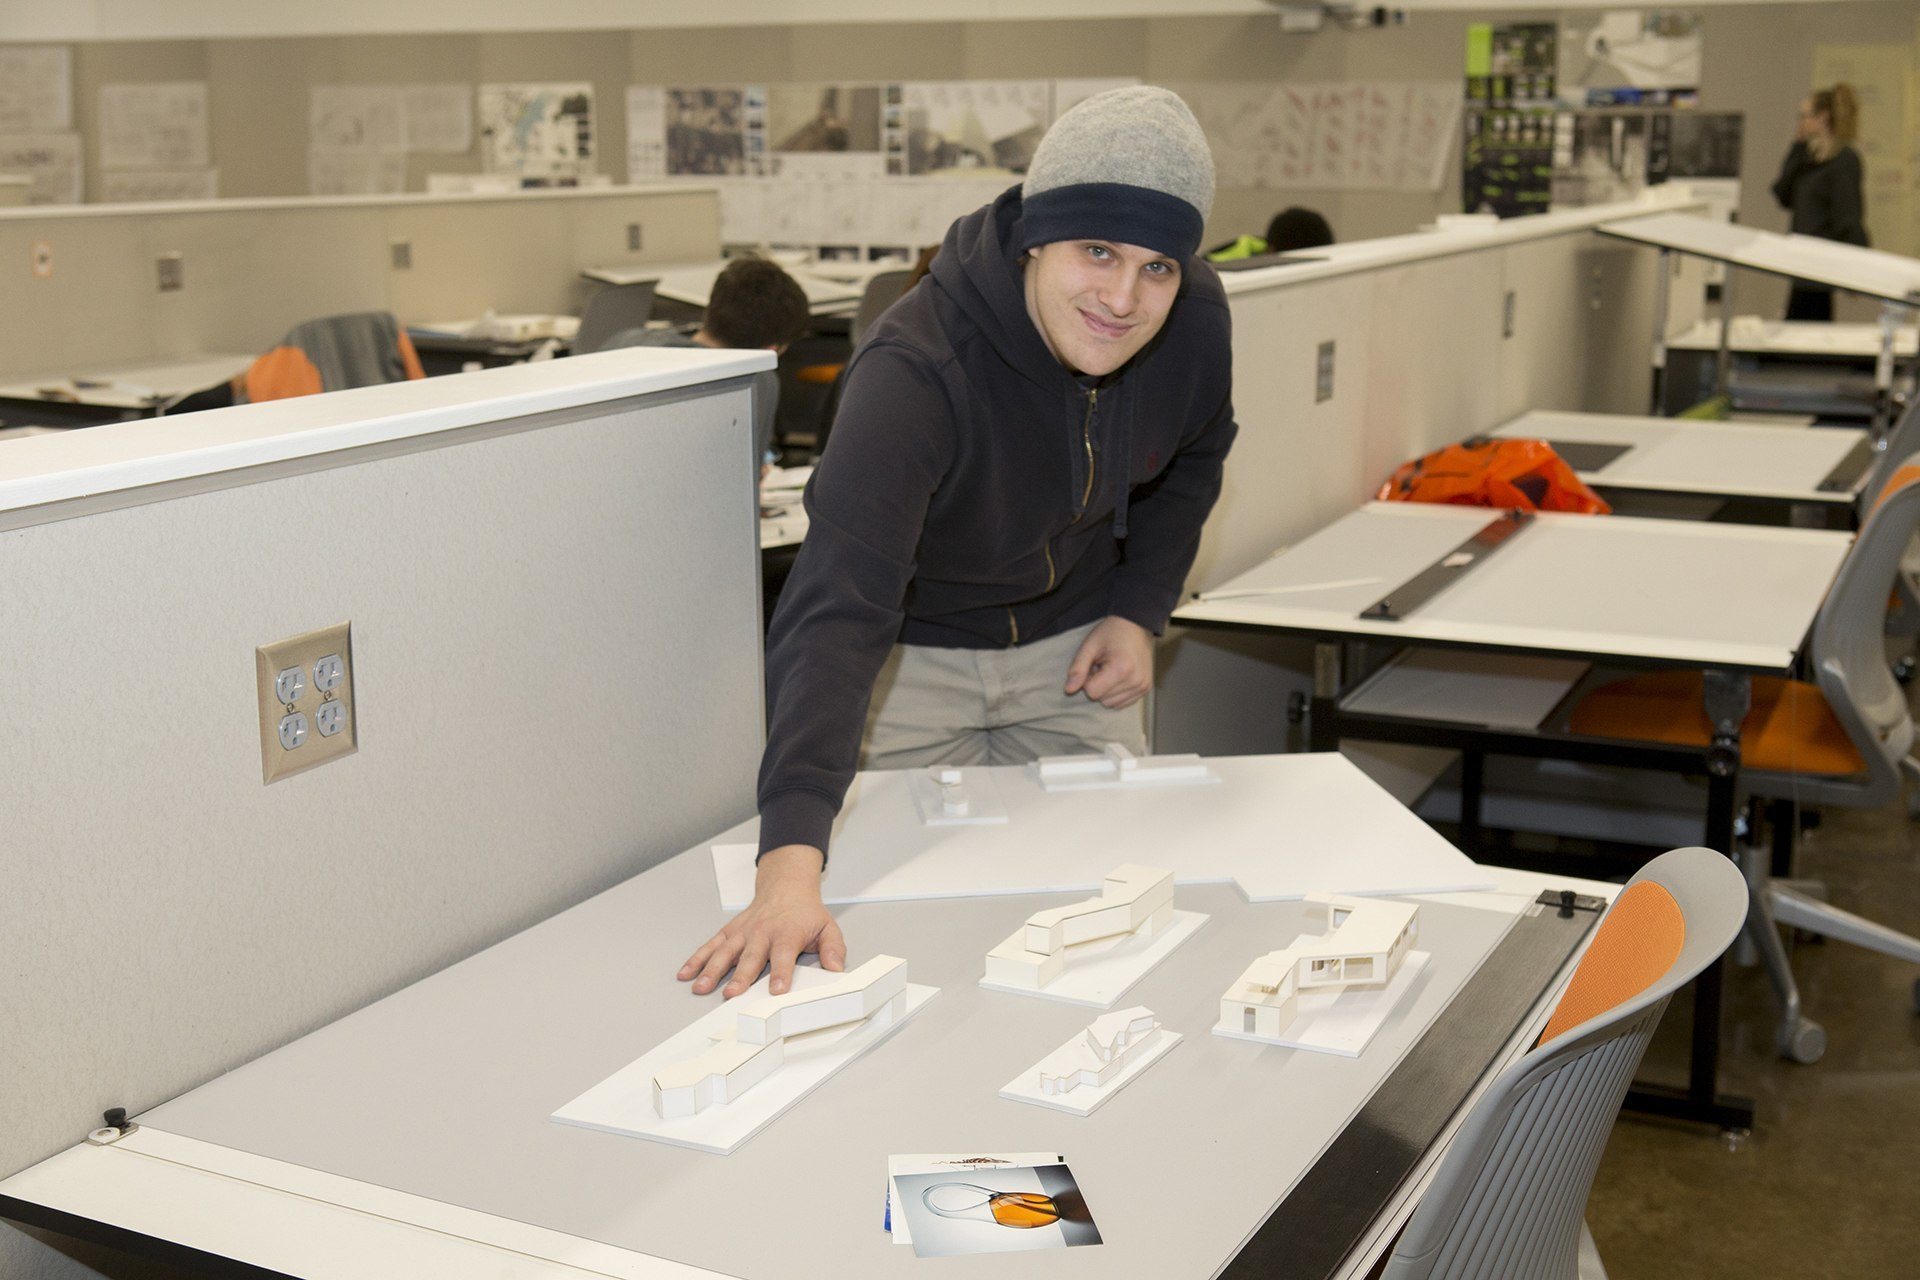 The BGSU architecture and environmental design major takes place in an intensive studio environment, newly built on the Ohio campus.